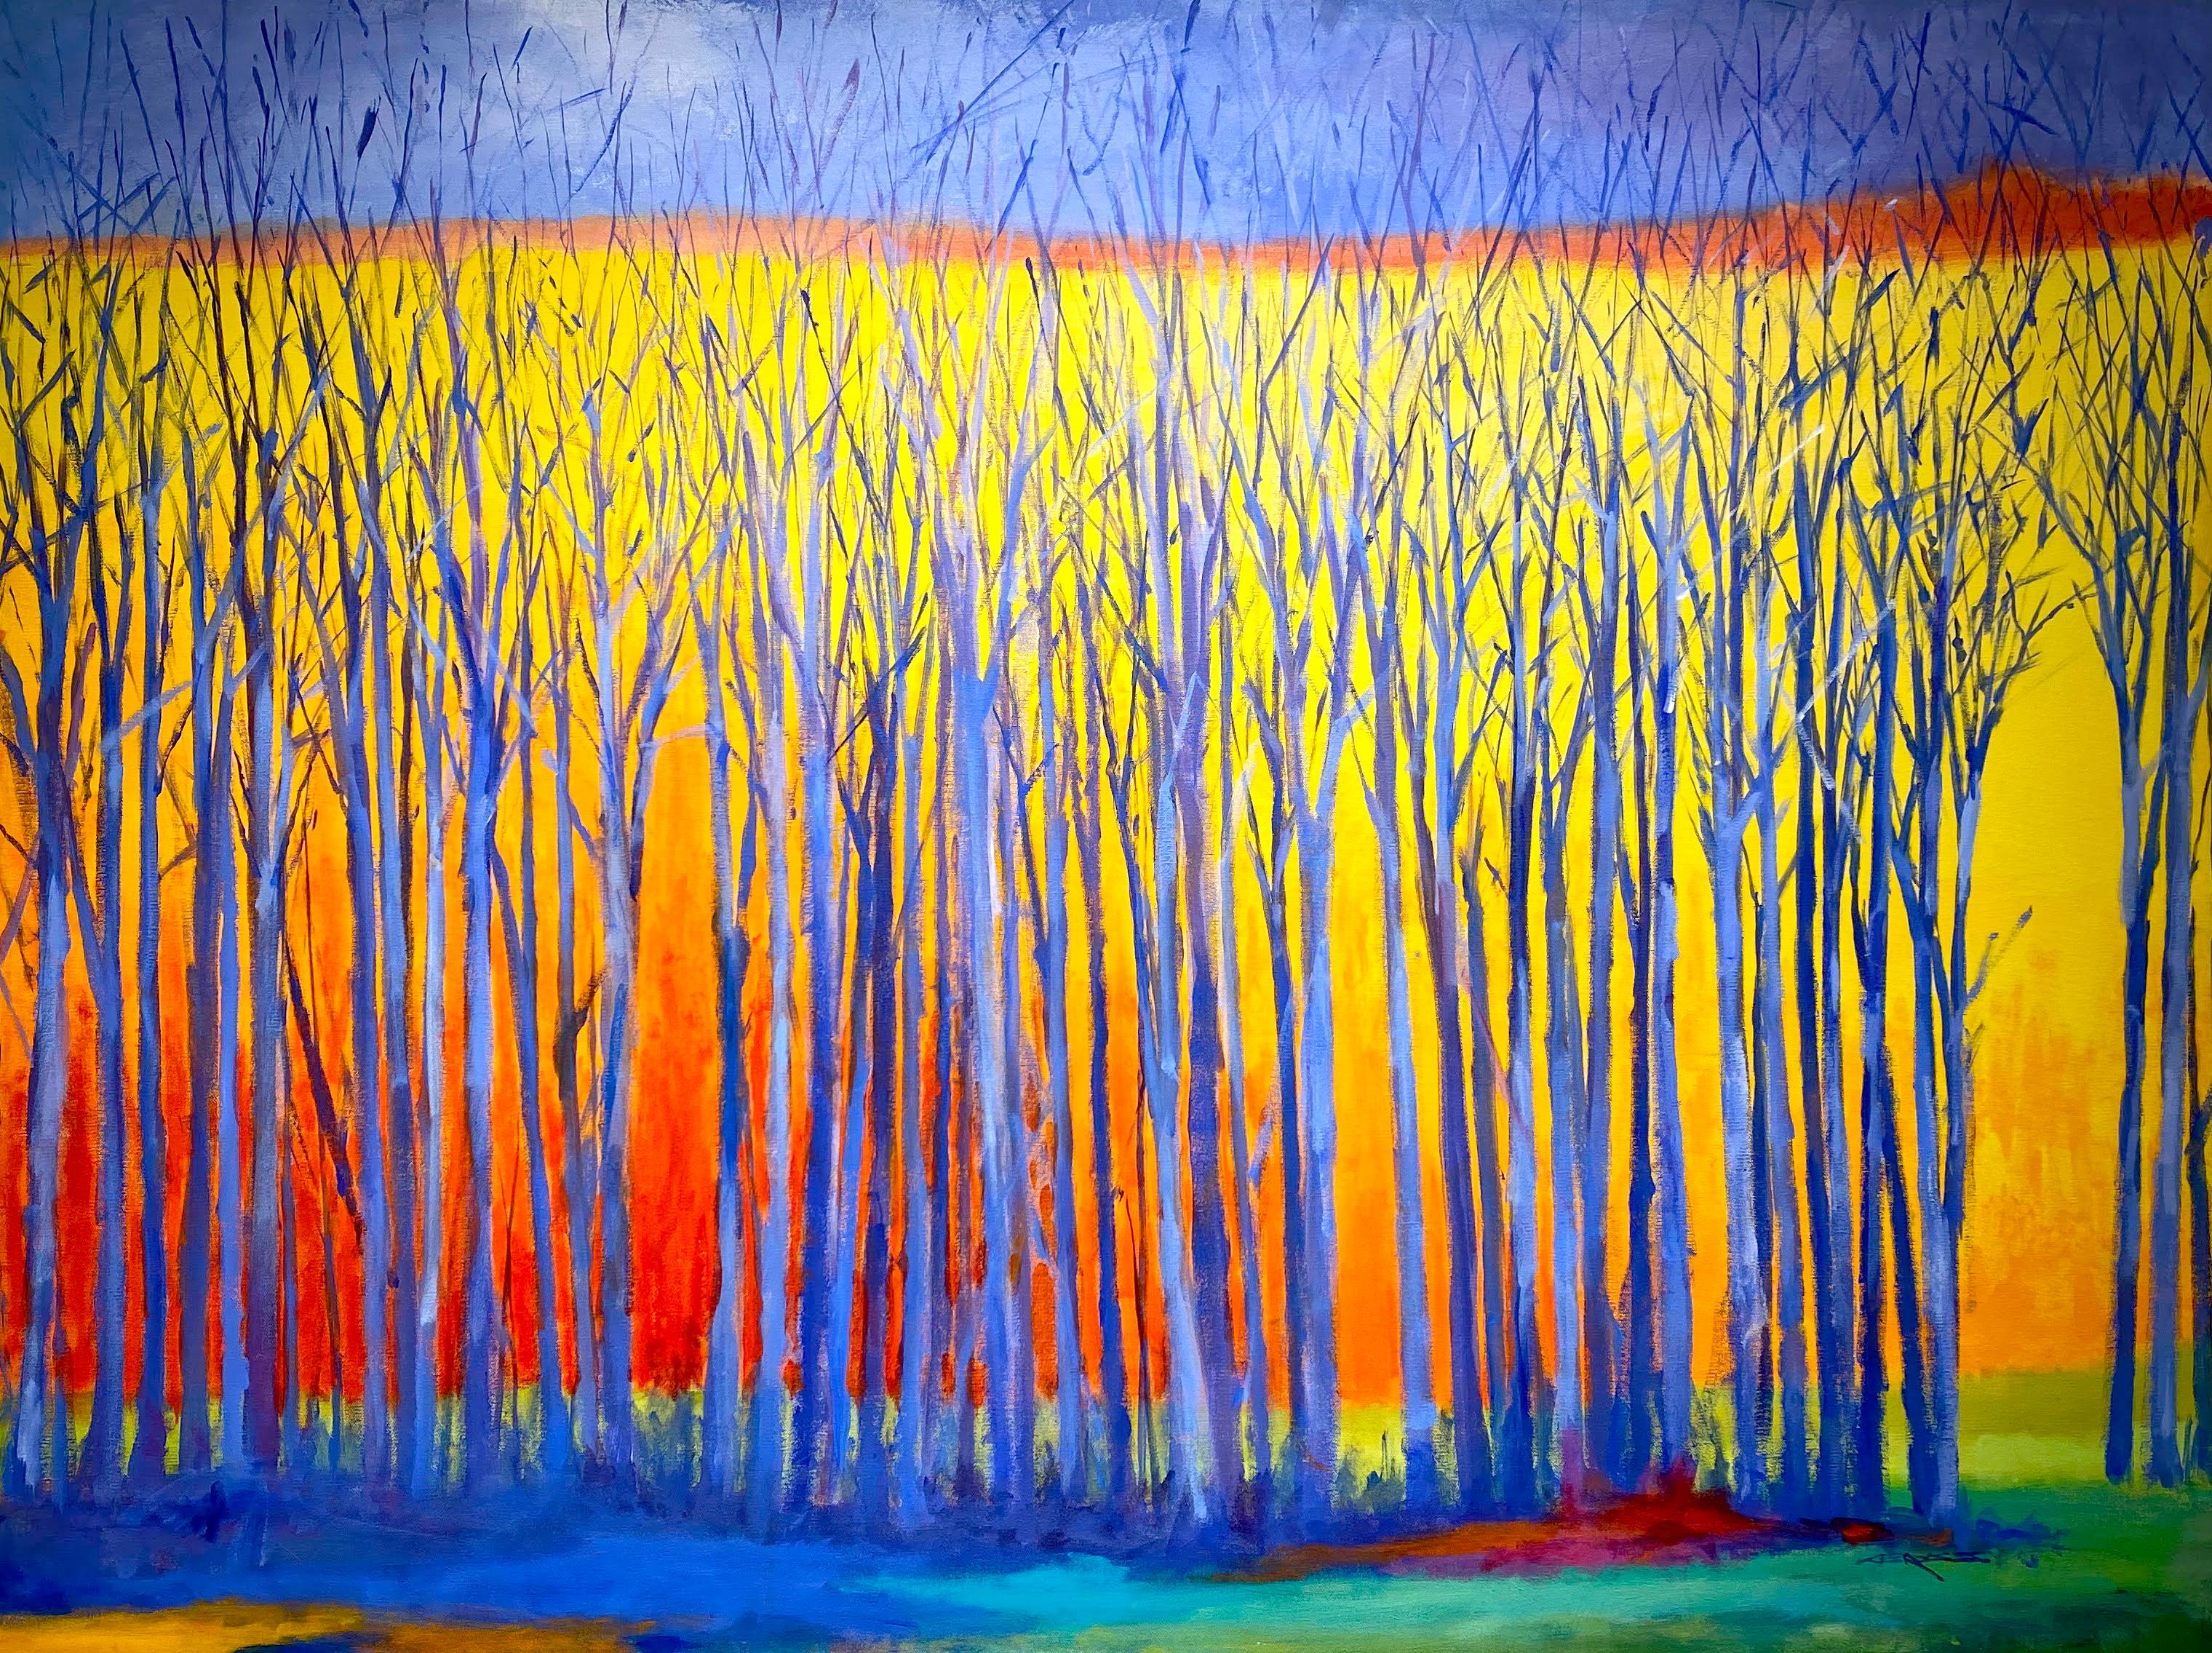 C.E. Ross, "Bare Blue Trees", Colorful Abstract Landscape Acrylic on Canvas